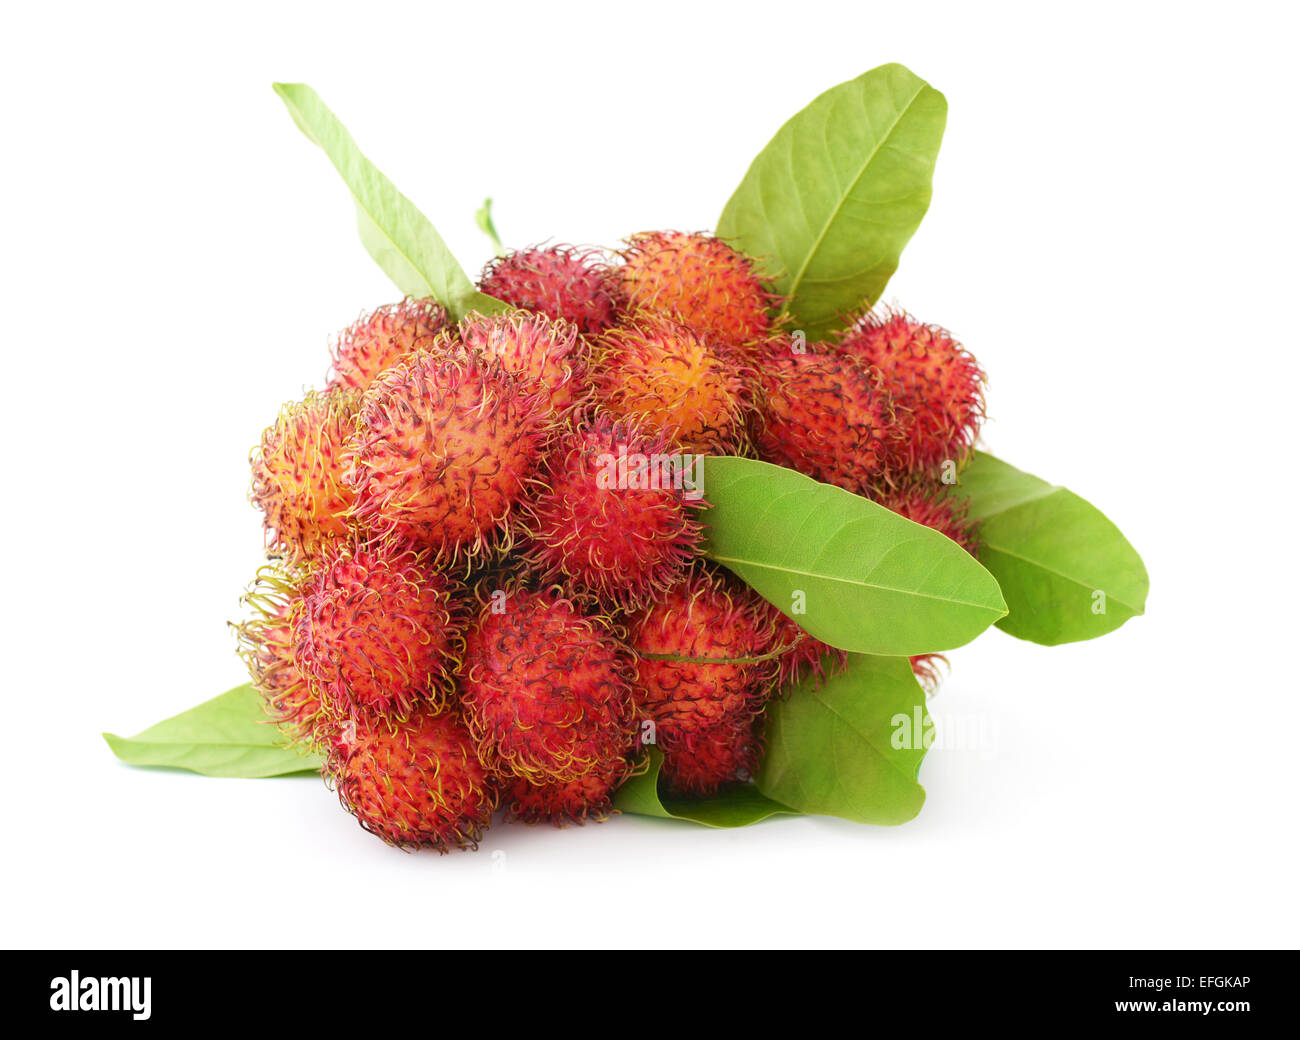 Fruits ramboutan isolated on white Banque D'Images